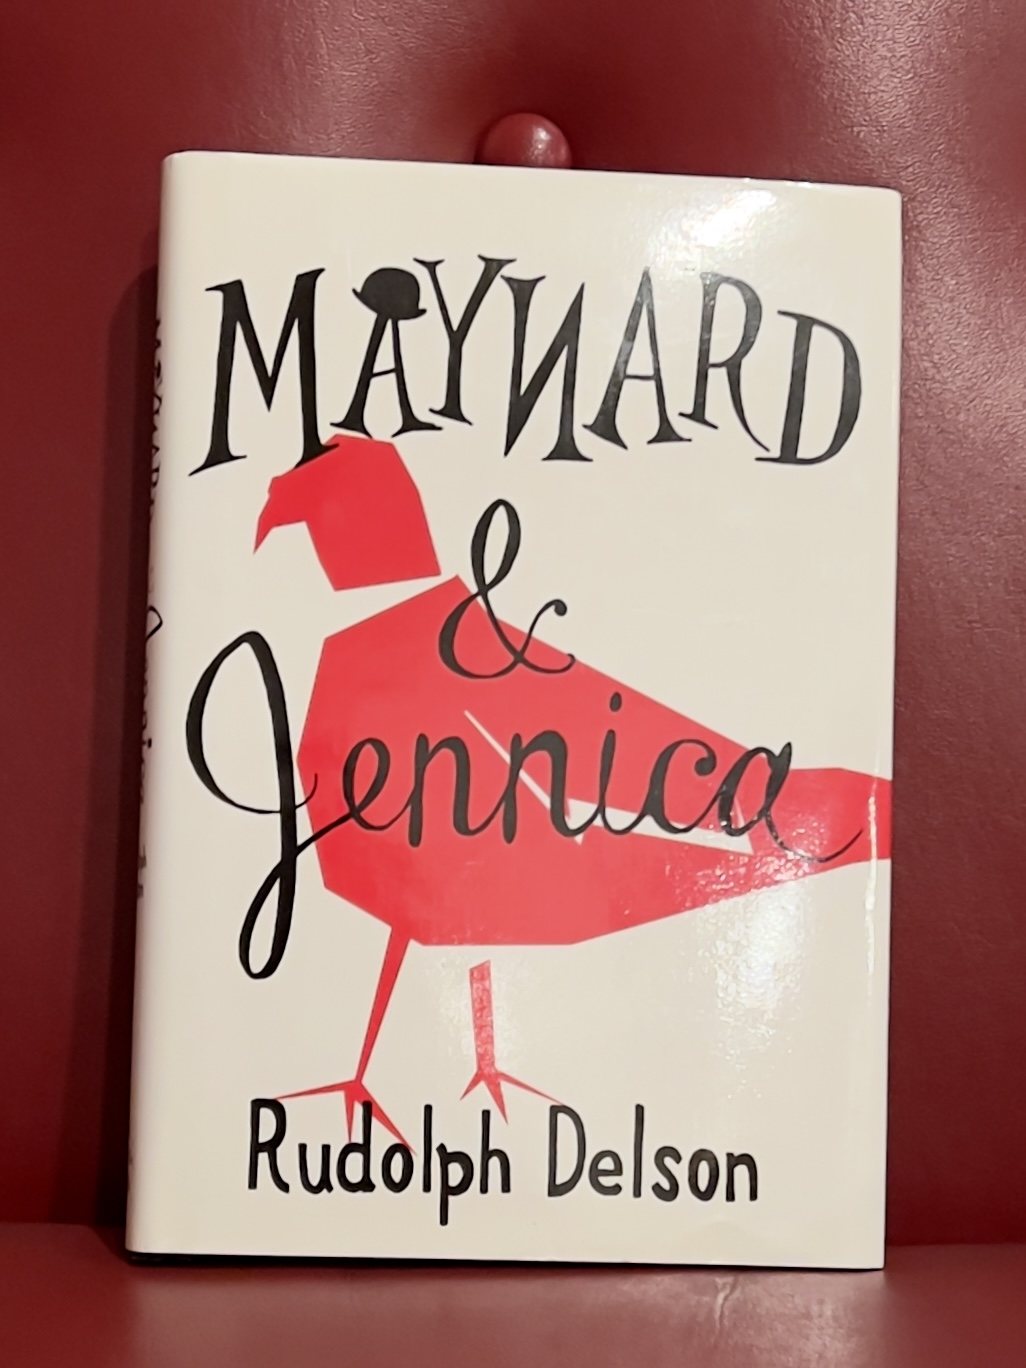 Maynard and Jennica by Rudolph Delson (book review)